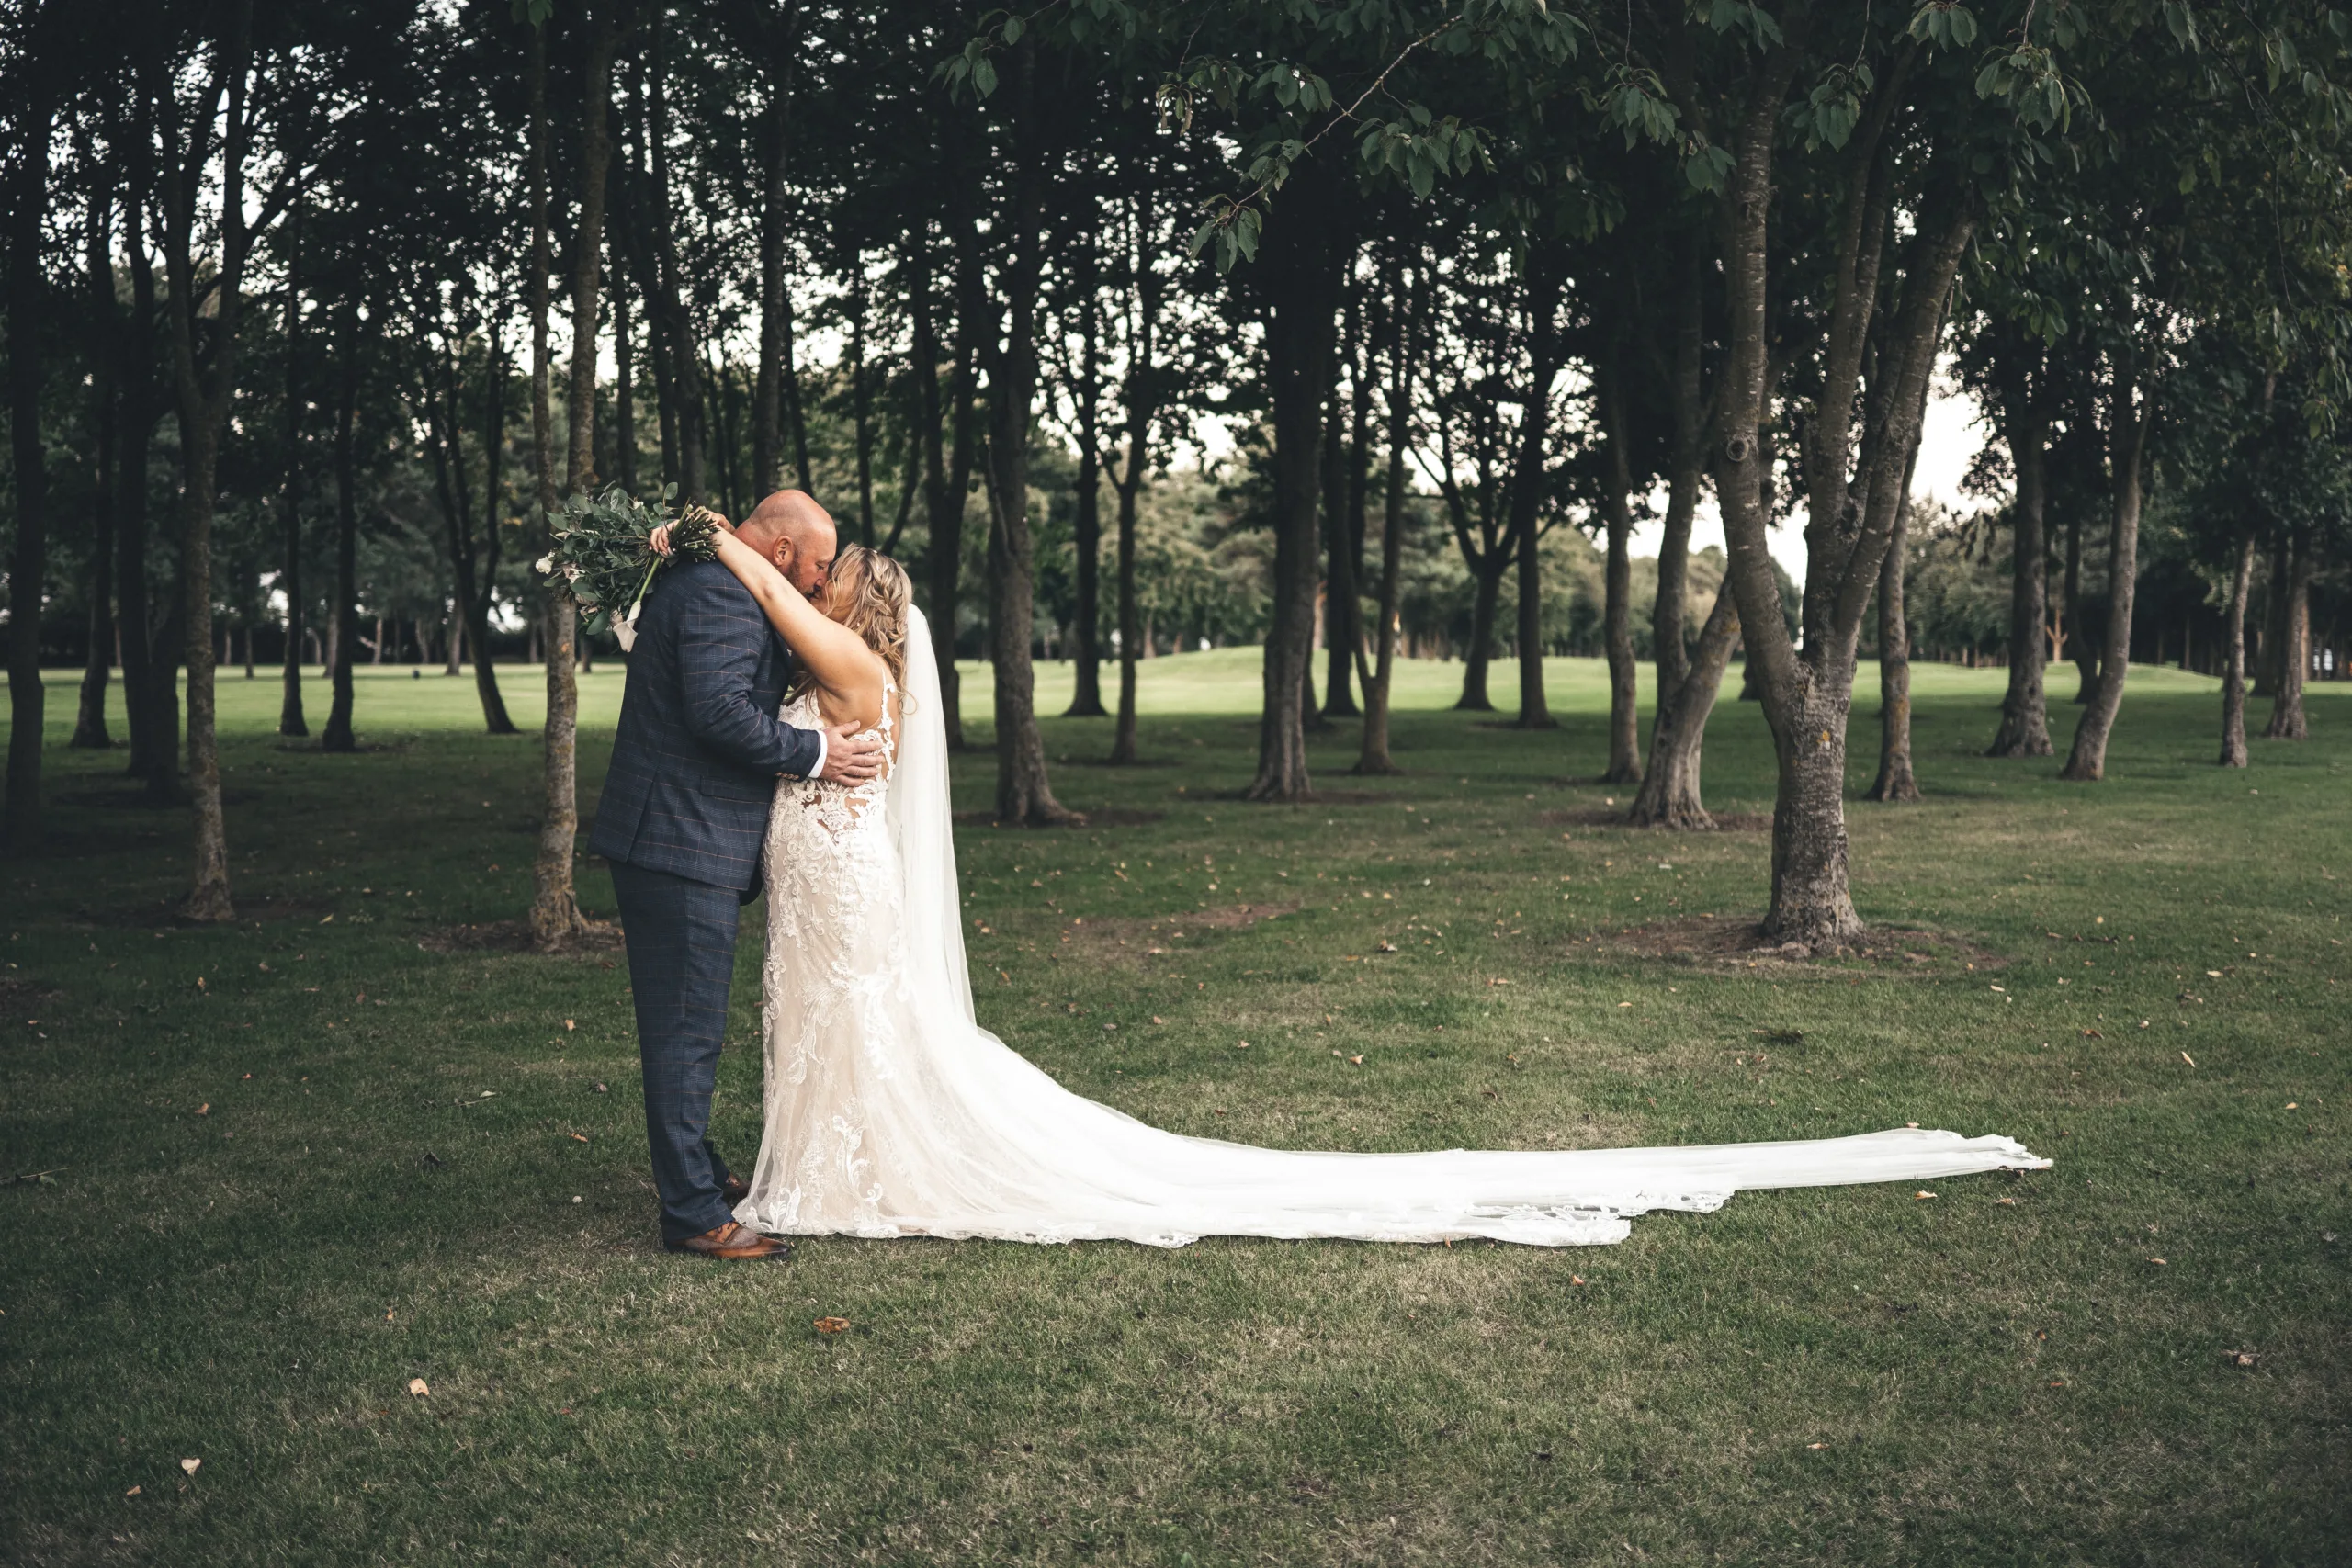 A wedding photographer captures the bride and groom sharing a kiss in a field of trees in Lincolnshire.